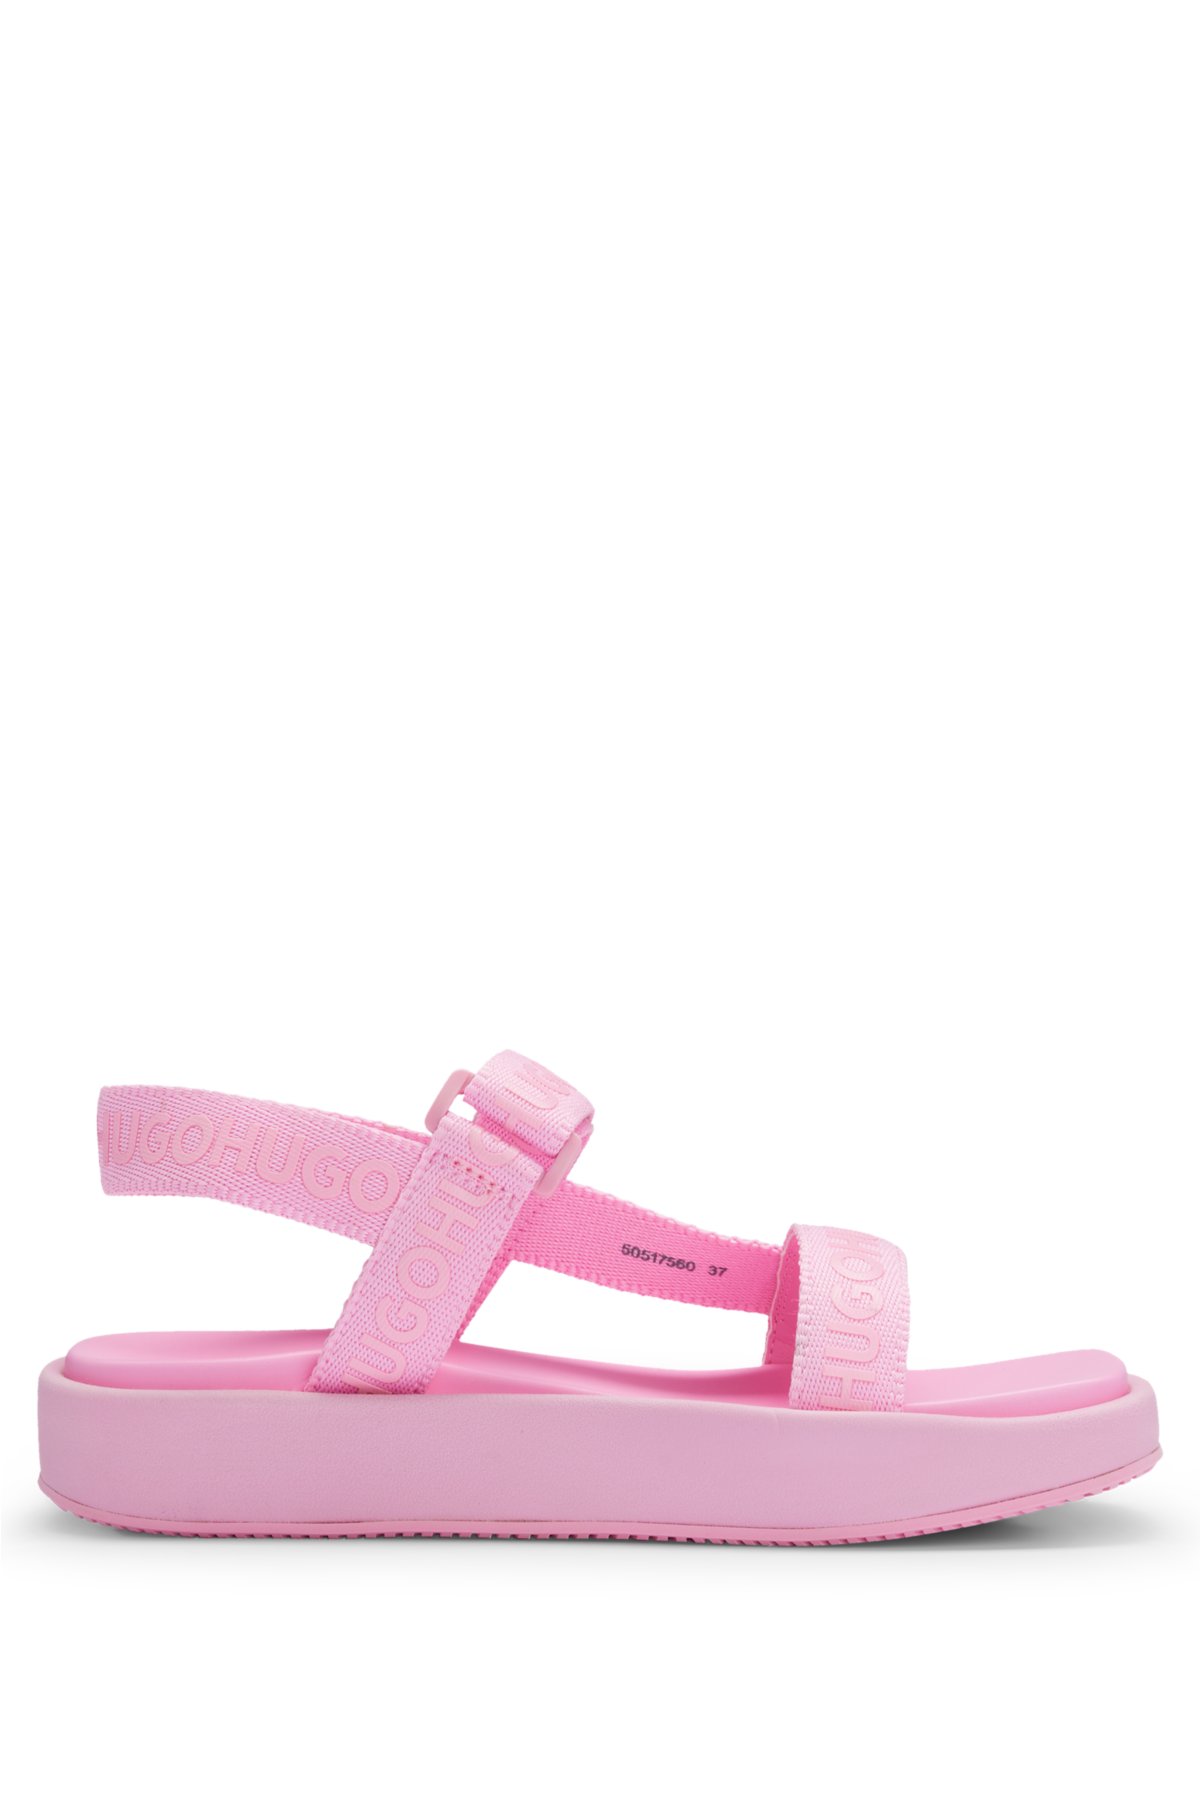 Stacked-logo sandals with branded straps, Pink